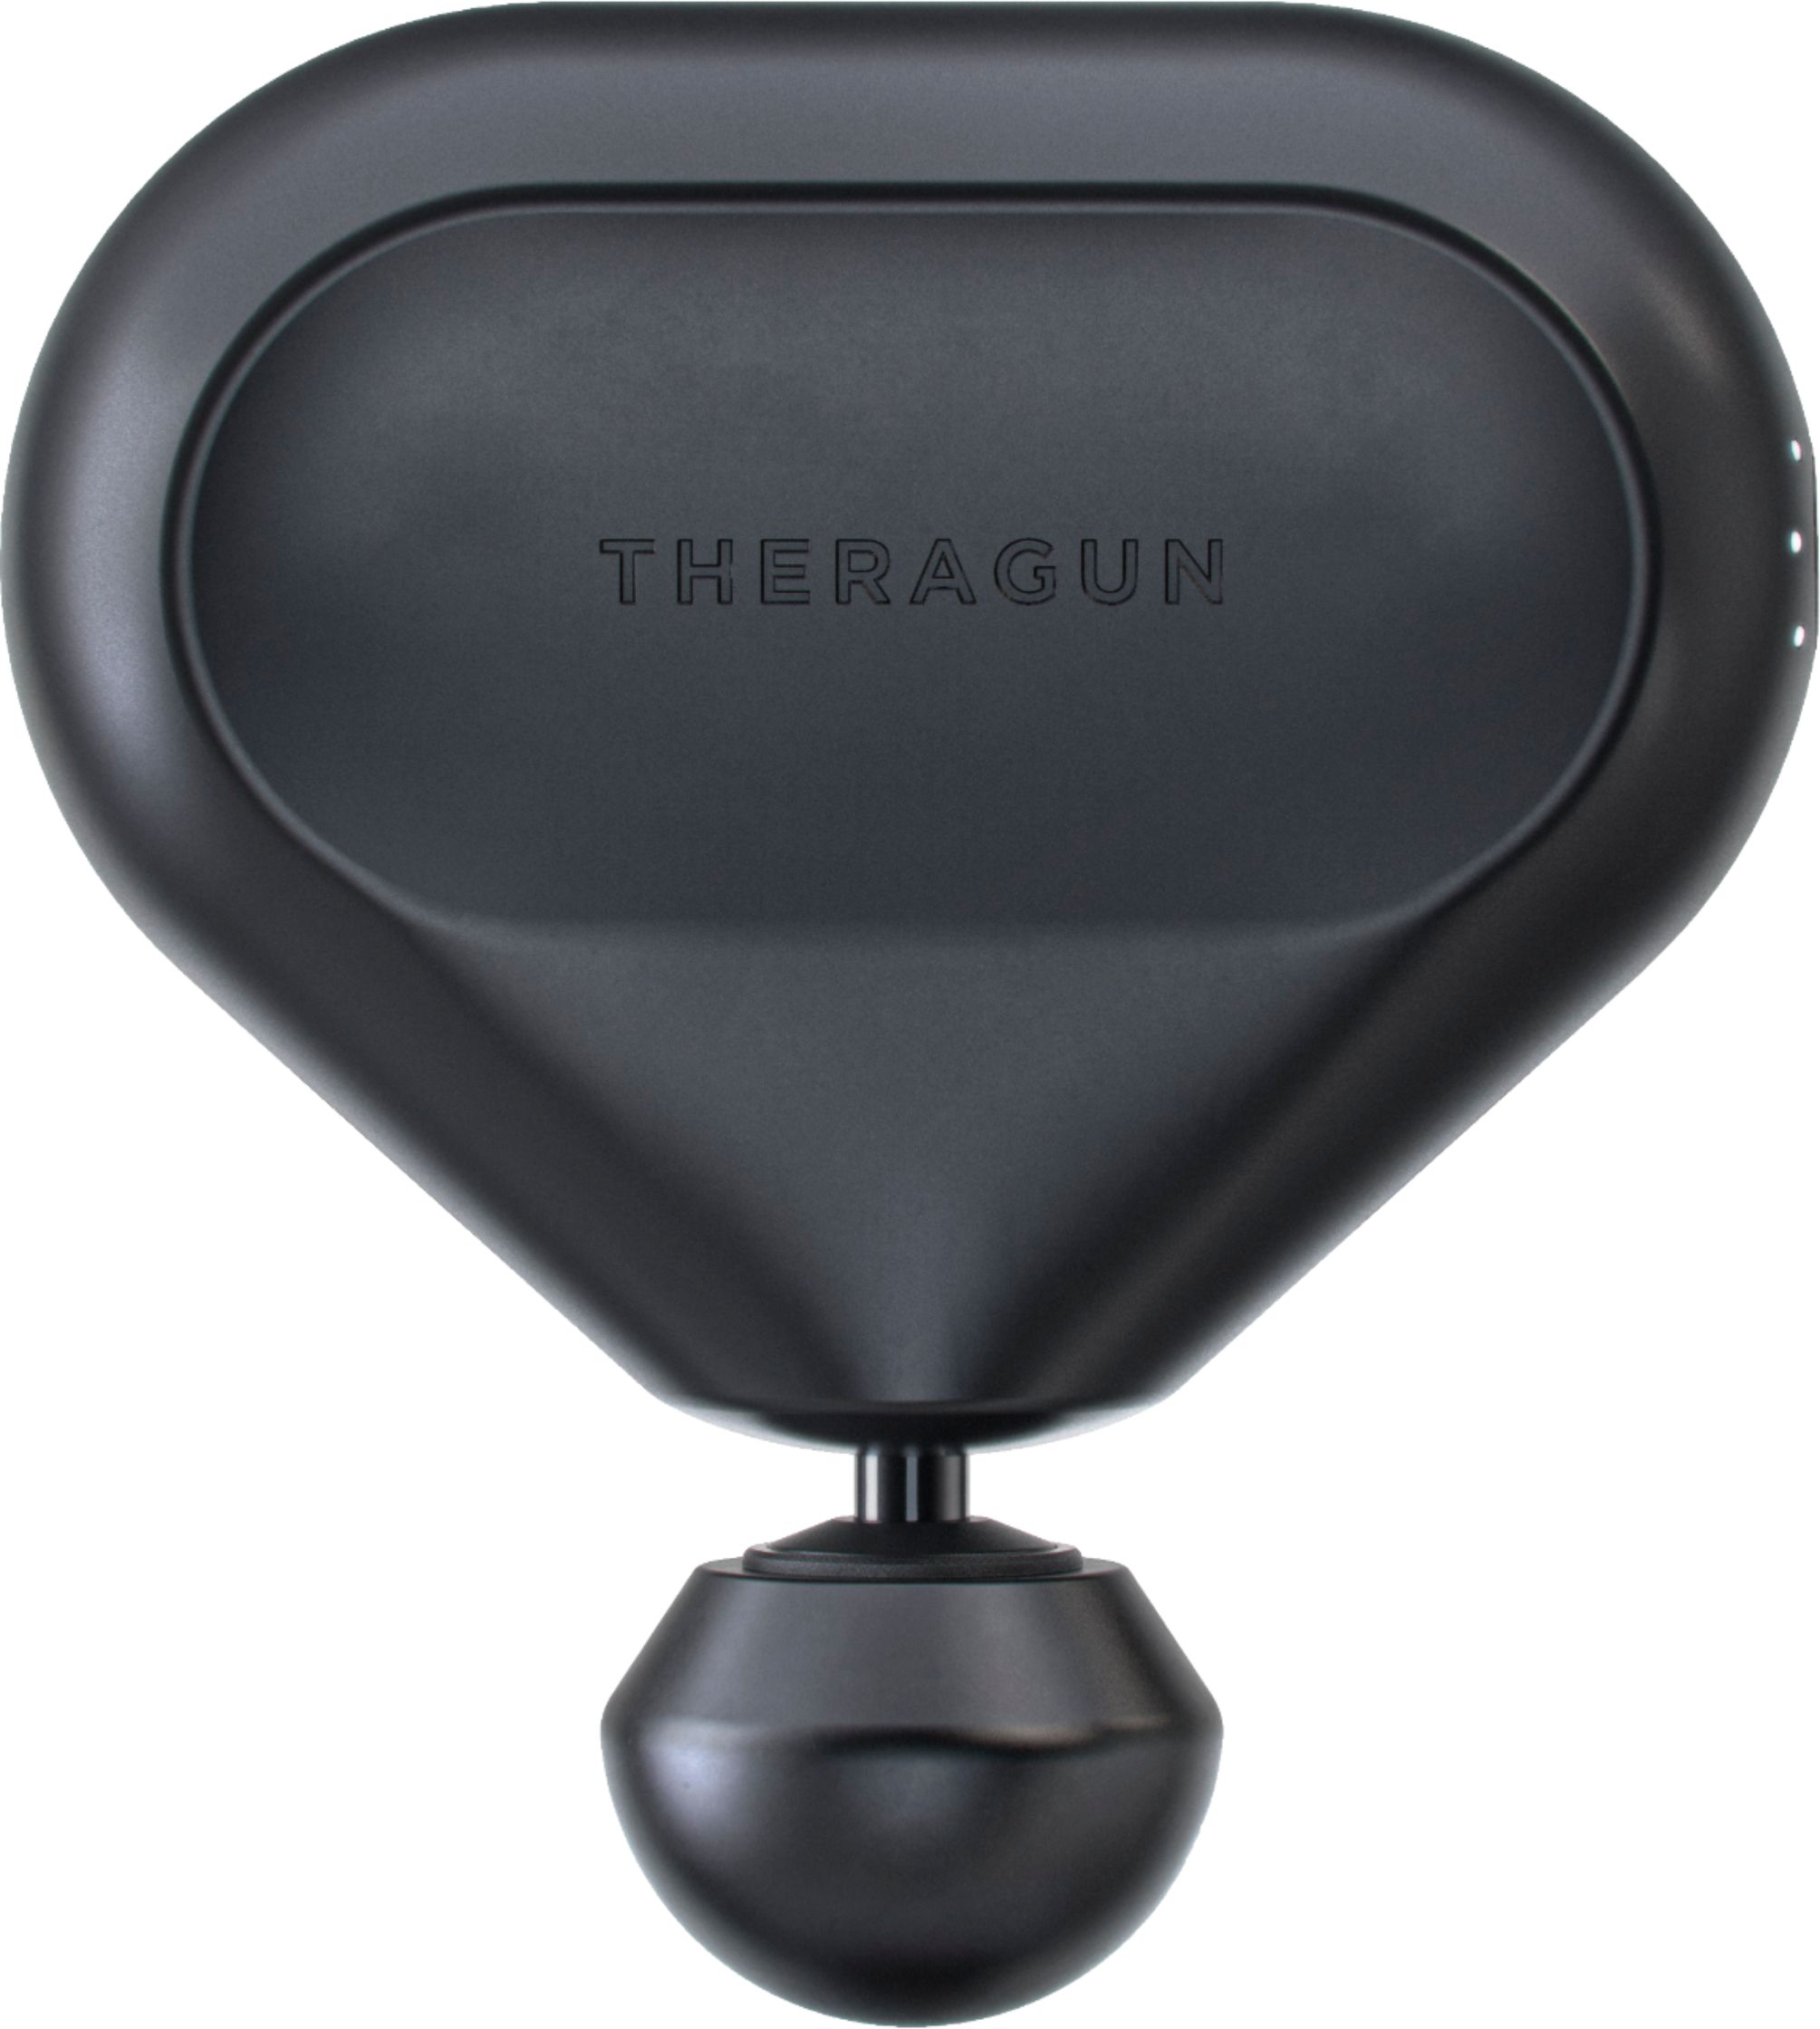 Therabody - Theragun mini Handheld Percussive Massage Device (Latest Model) with Travel Pouch - Black